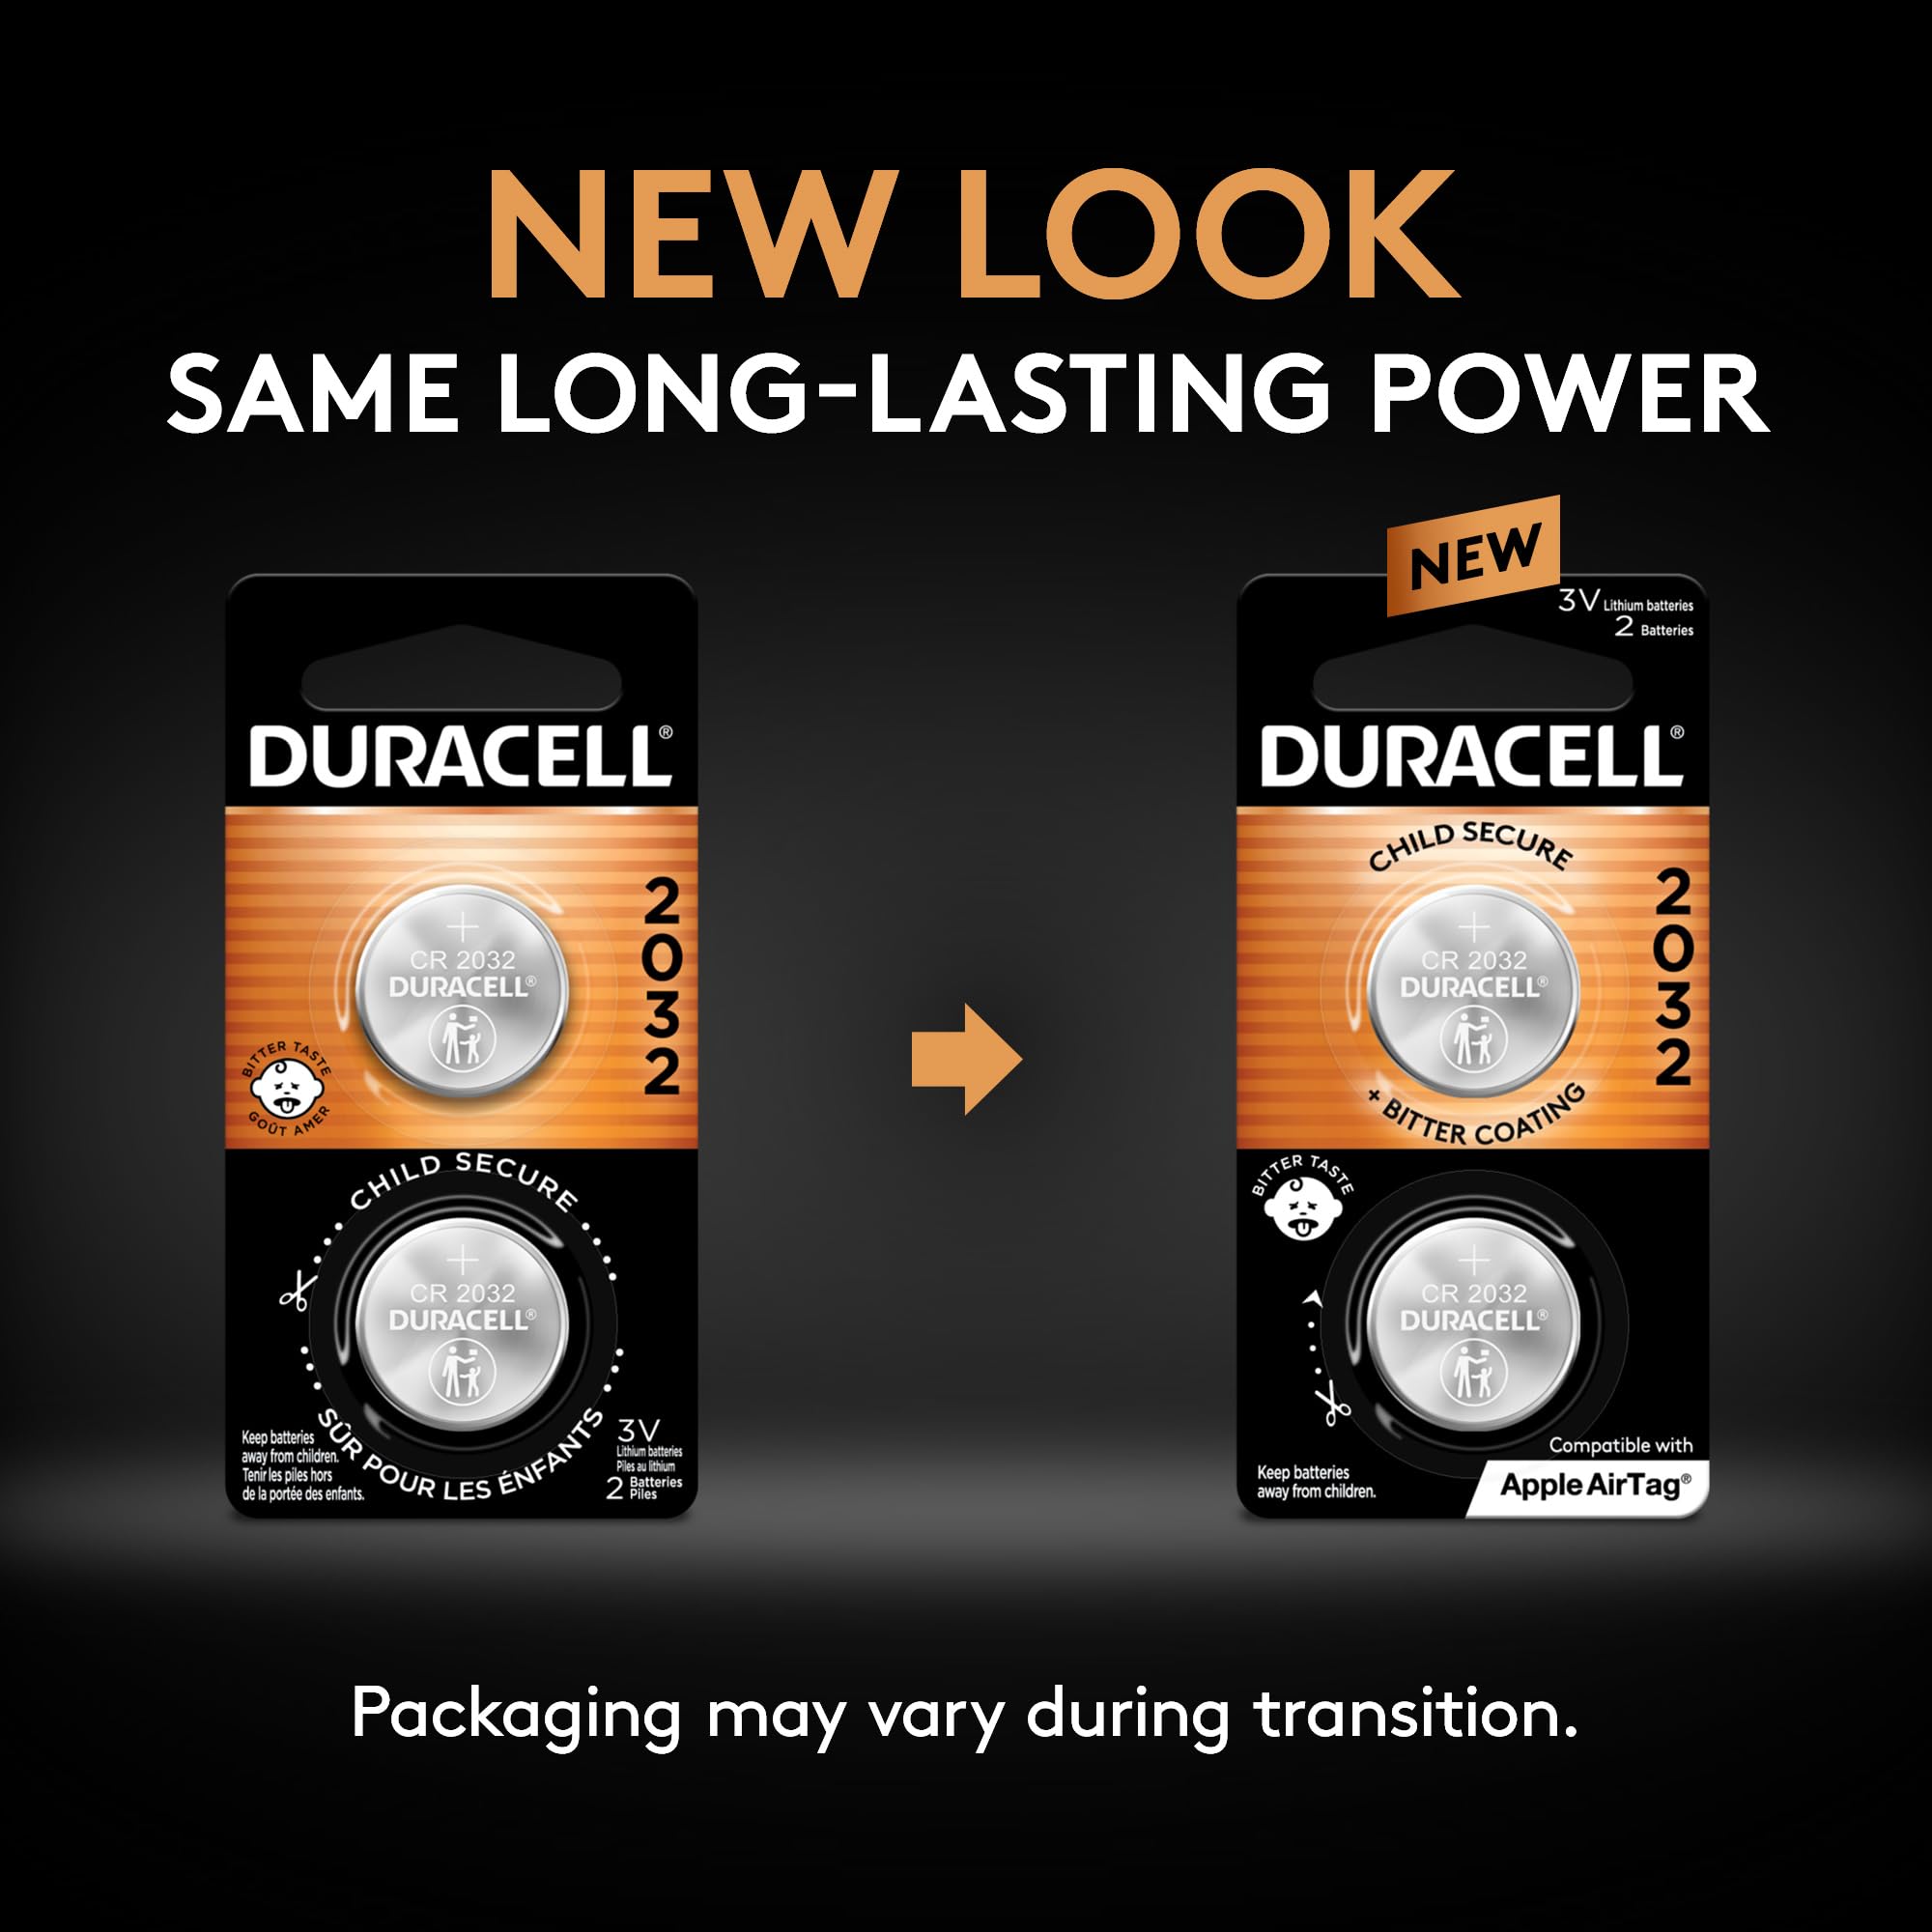 Duracell CR2032 3V Lithium Battery, Child Safety Features, 2 Count Pack, Lithium Coin Battery for Key Fob, Car Remote, Glucose Monitor, CR Lithium 3 Volt Cell